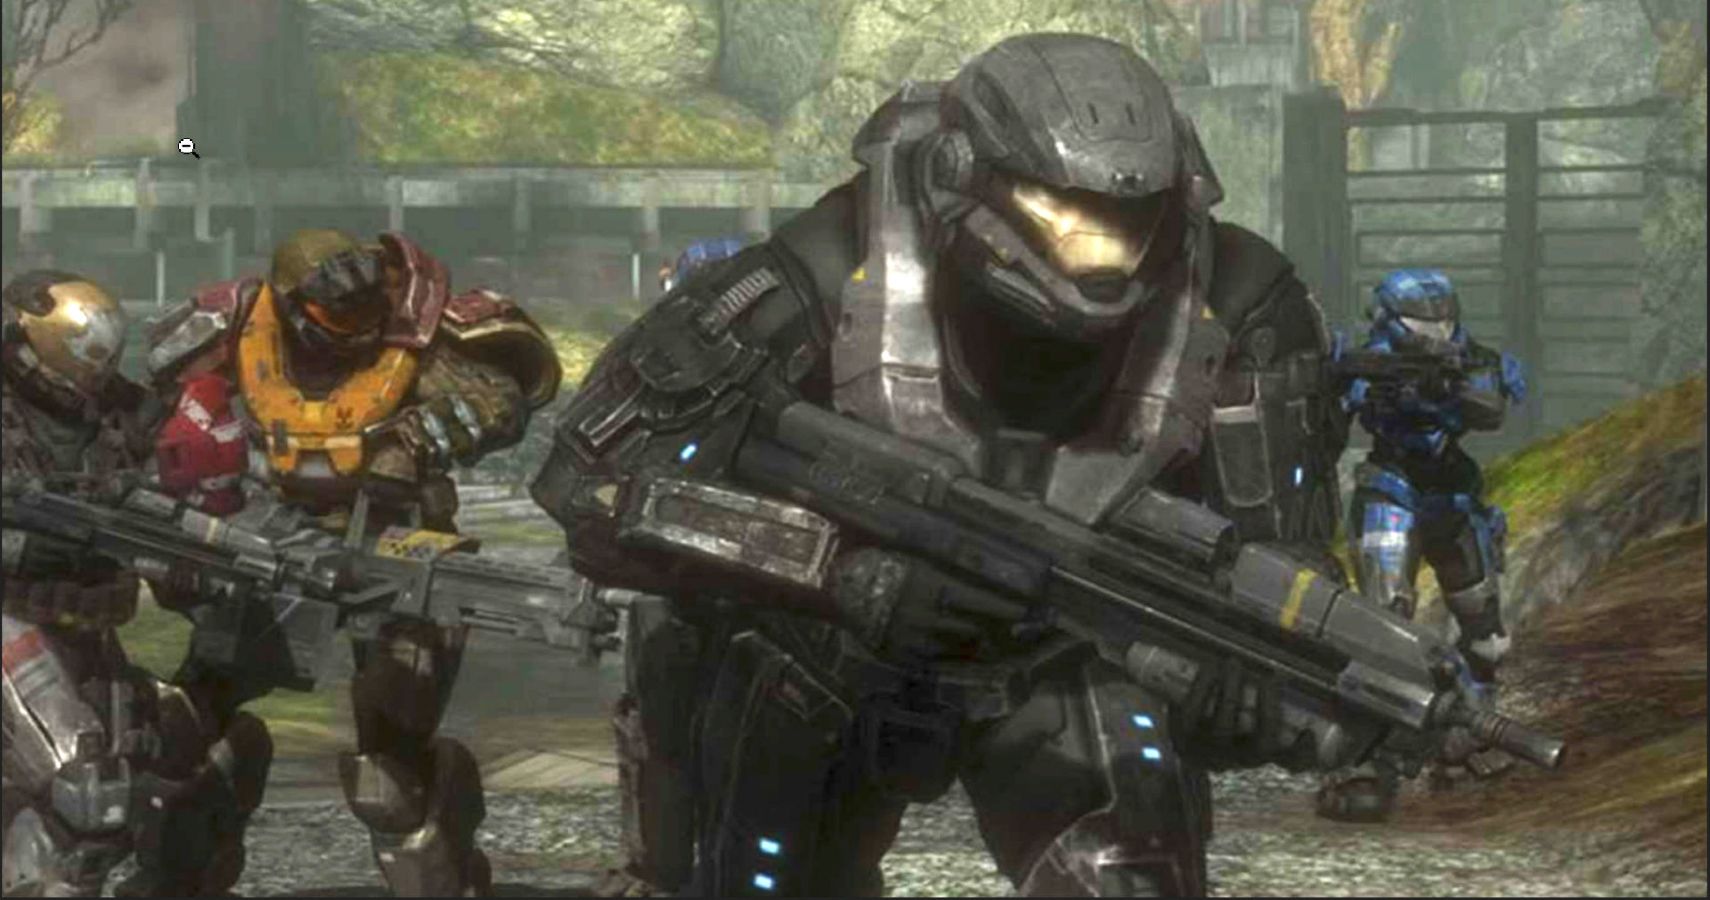 Halo: Reach (PC) Campaign Review